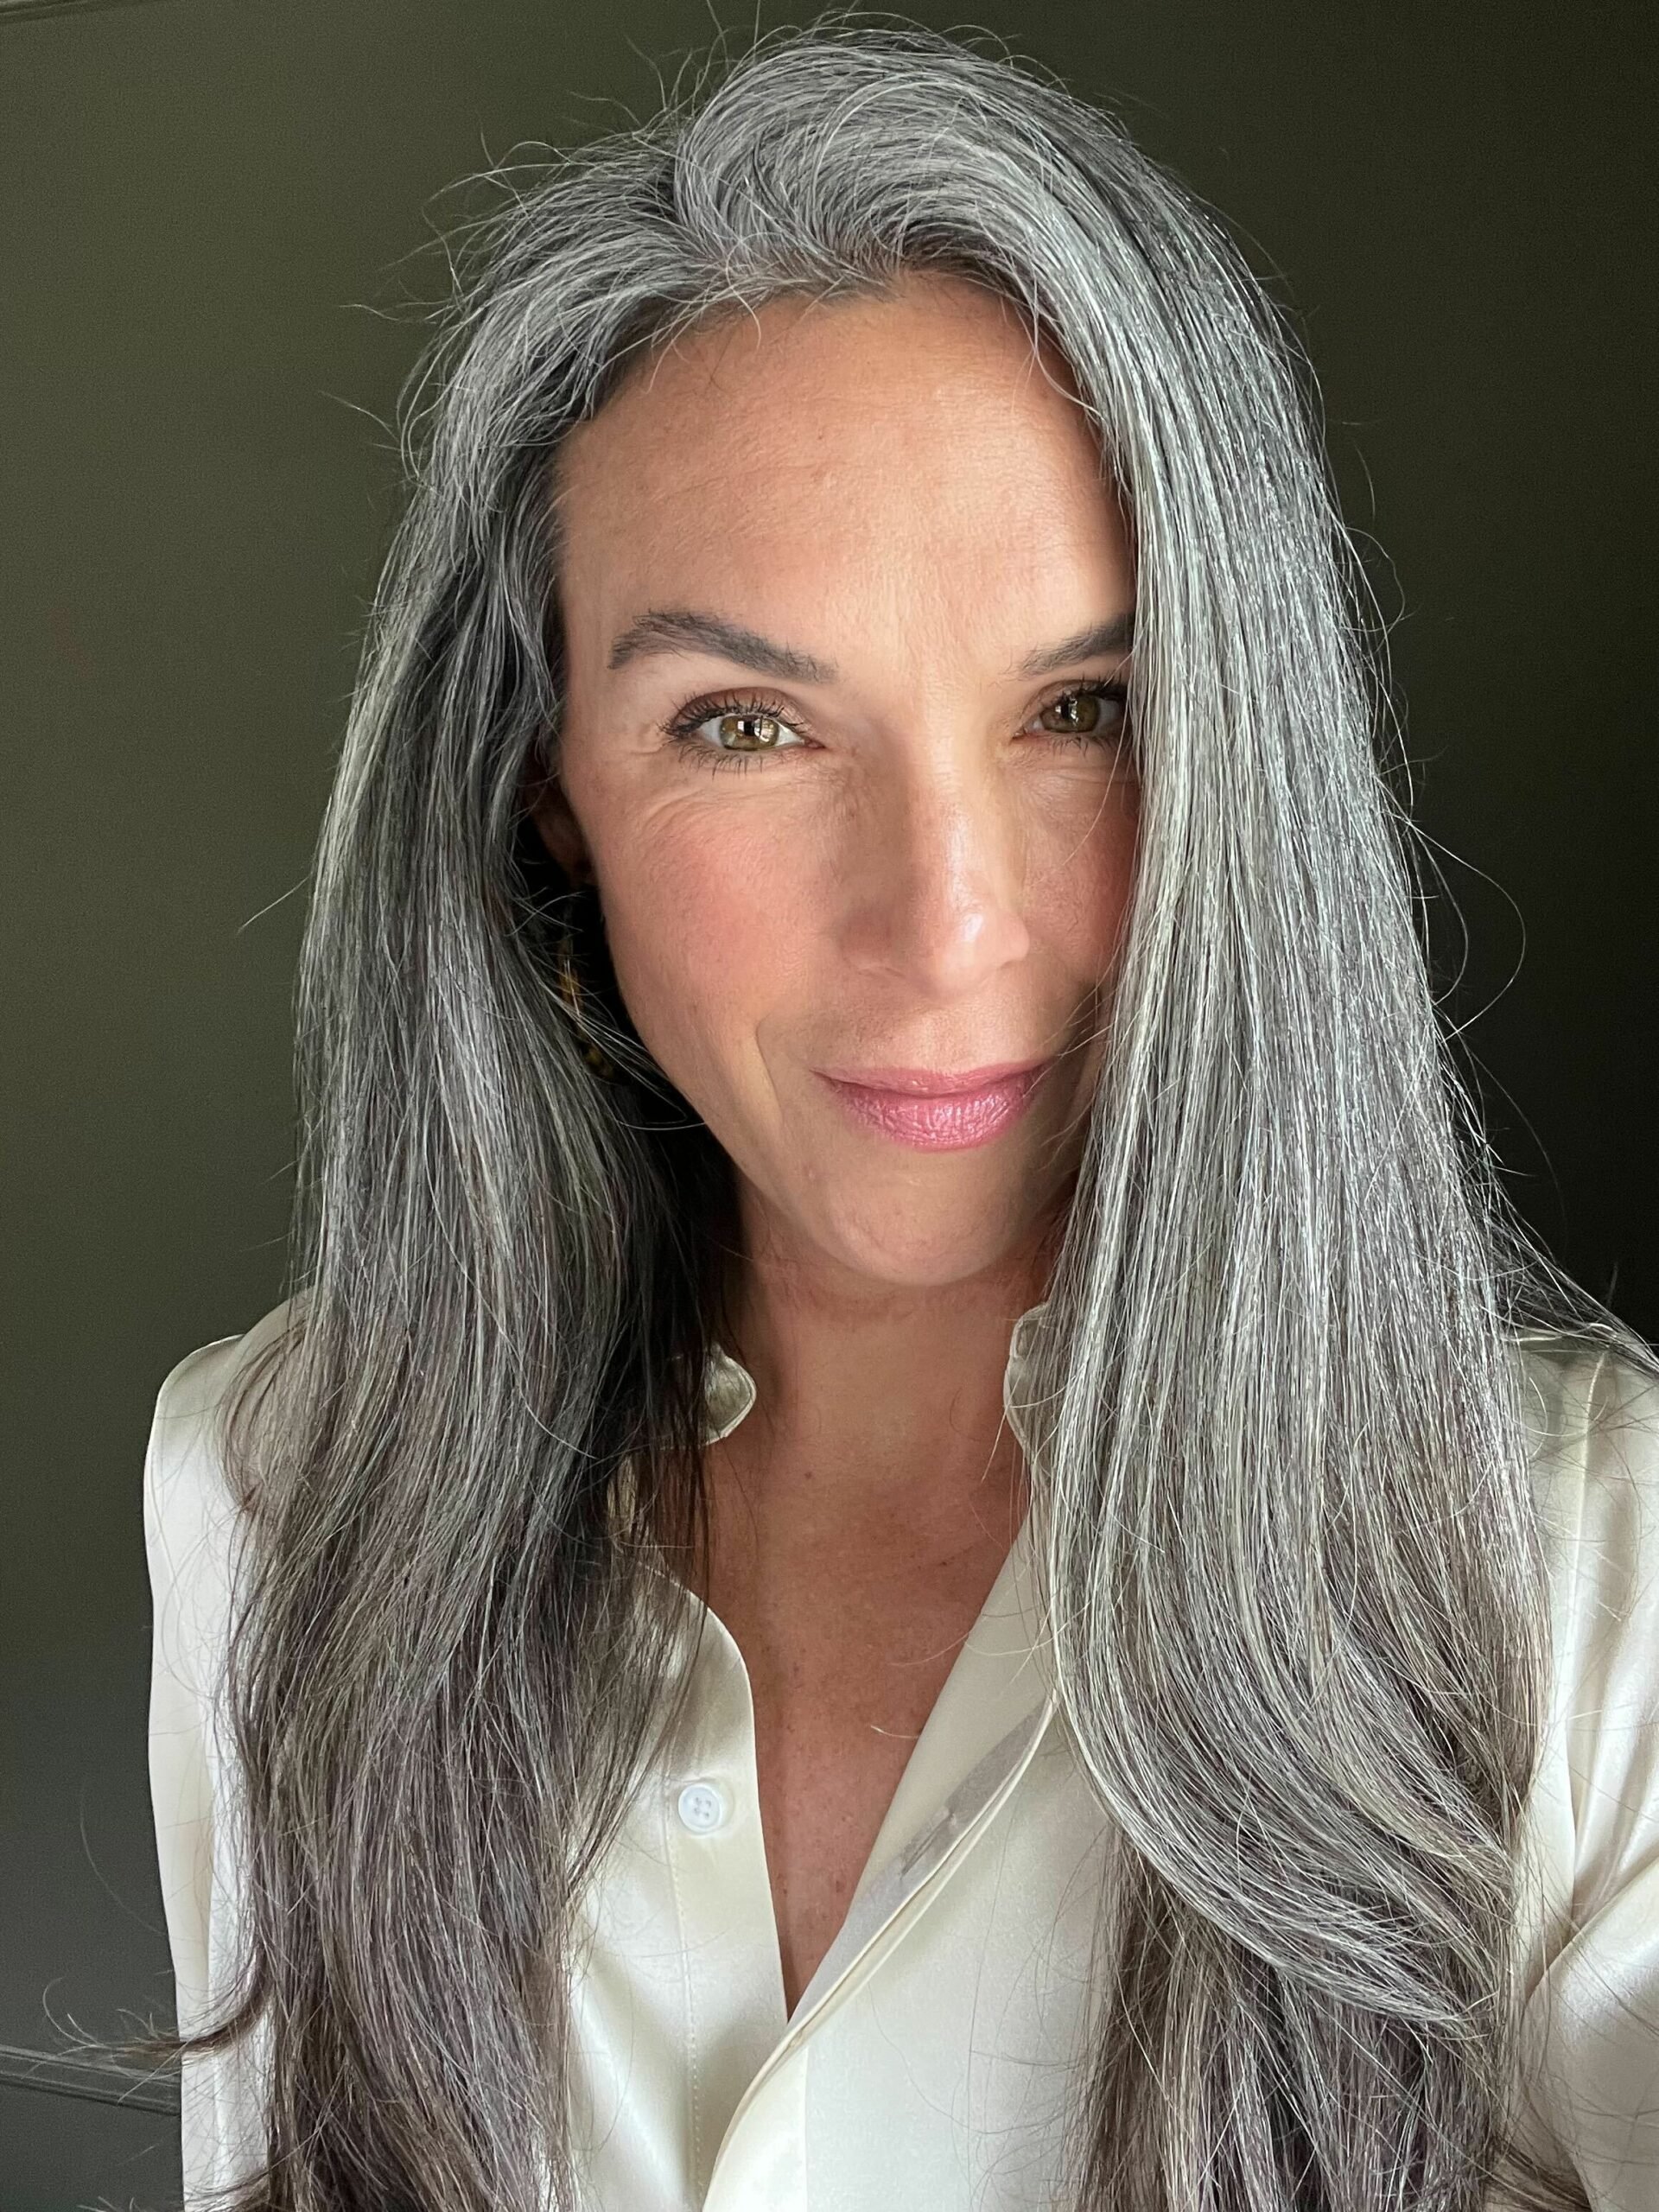 A woman with long gray hair after styling it with the Dyson Airwrap Round brush attachment.